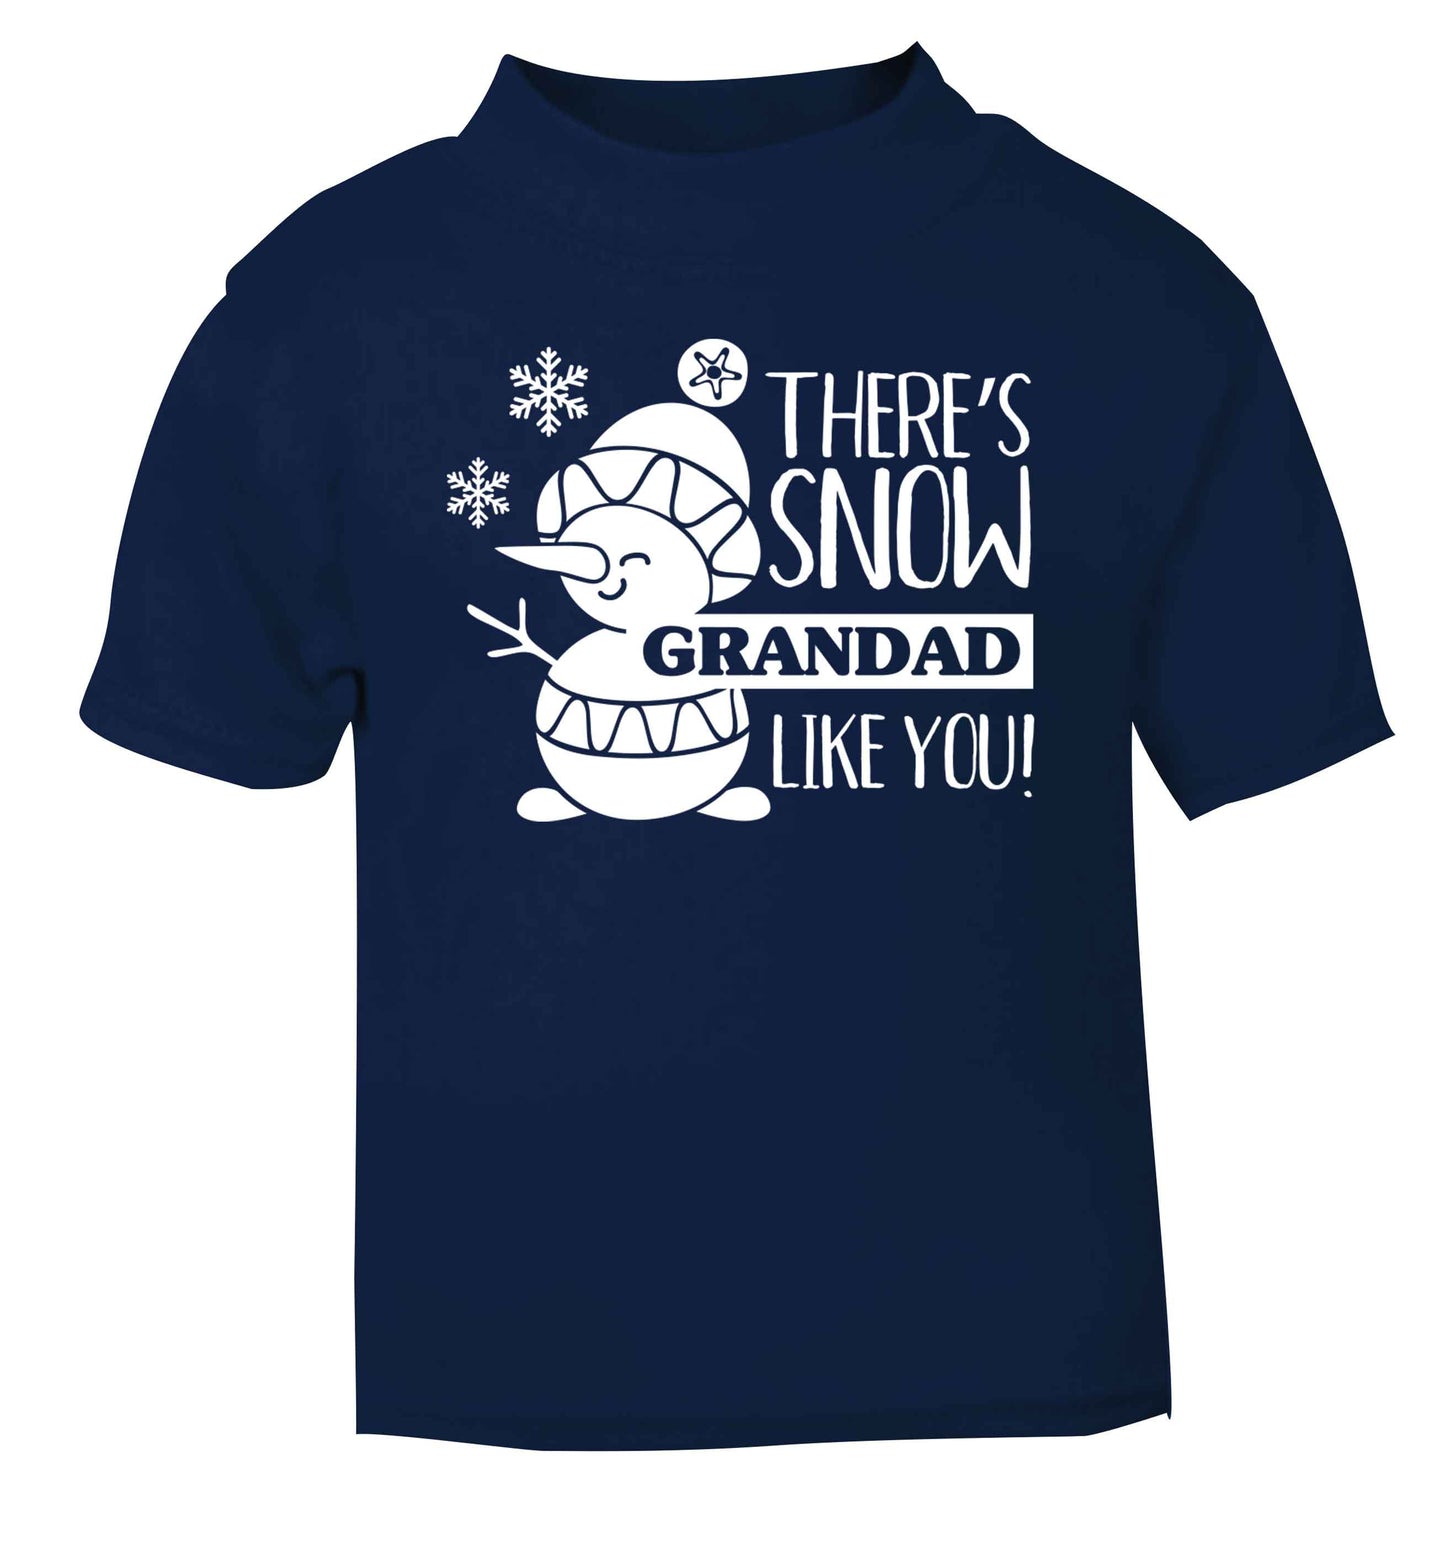 There's snow grandad like you navy baby toddler Tshirt 2 Years